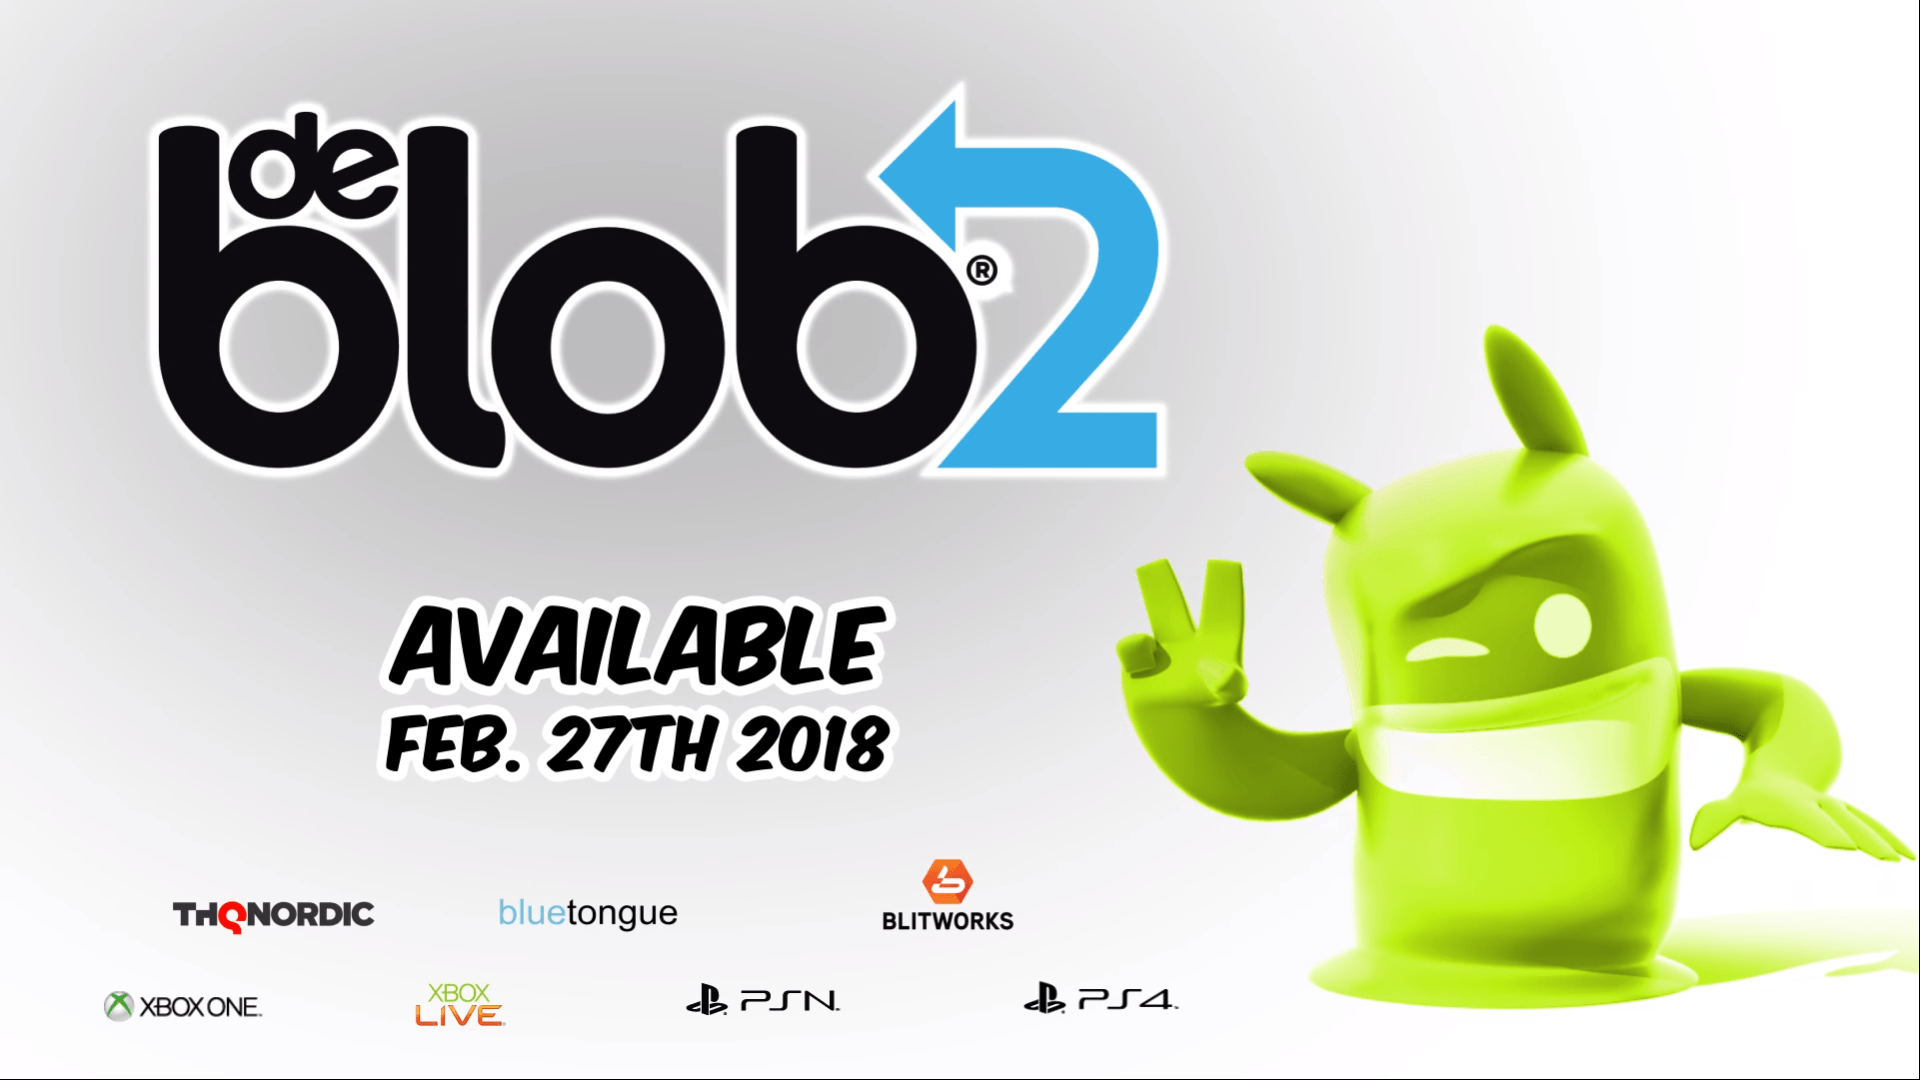 de Blob 2 Splats its Way Onto PS4 and Xbox One in February